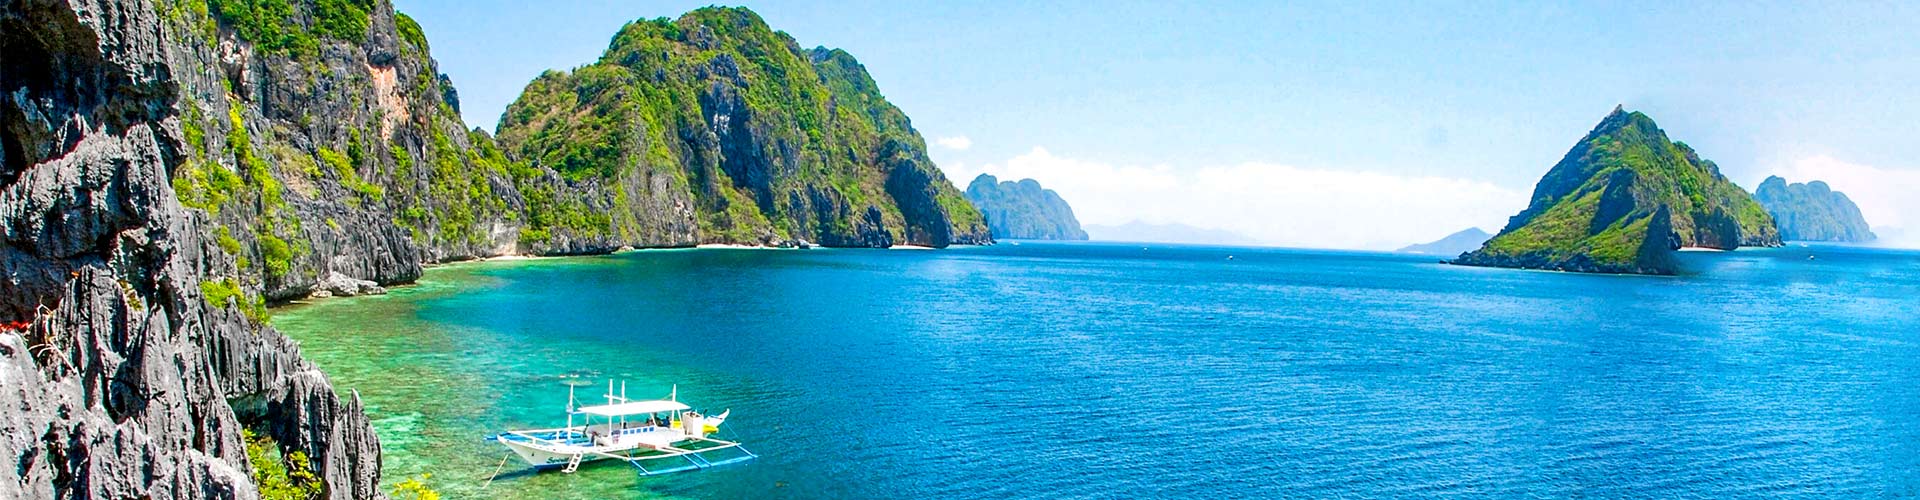 14 Days Philippines Highlights Tour with North Luzon & EI Nido